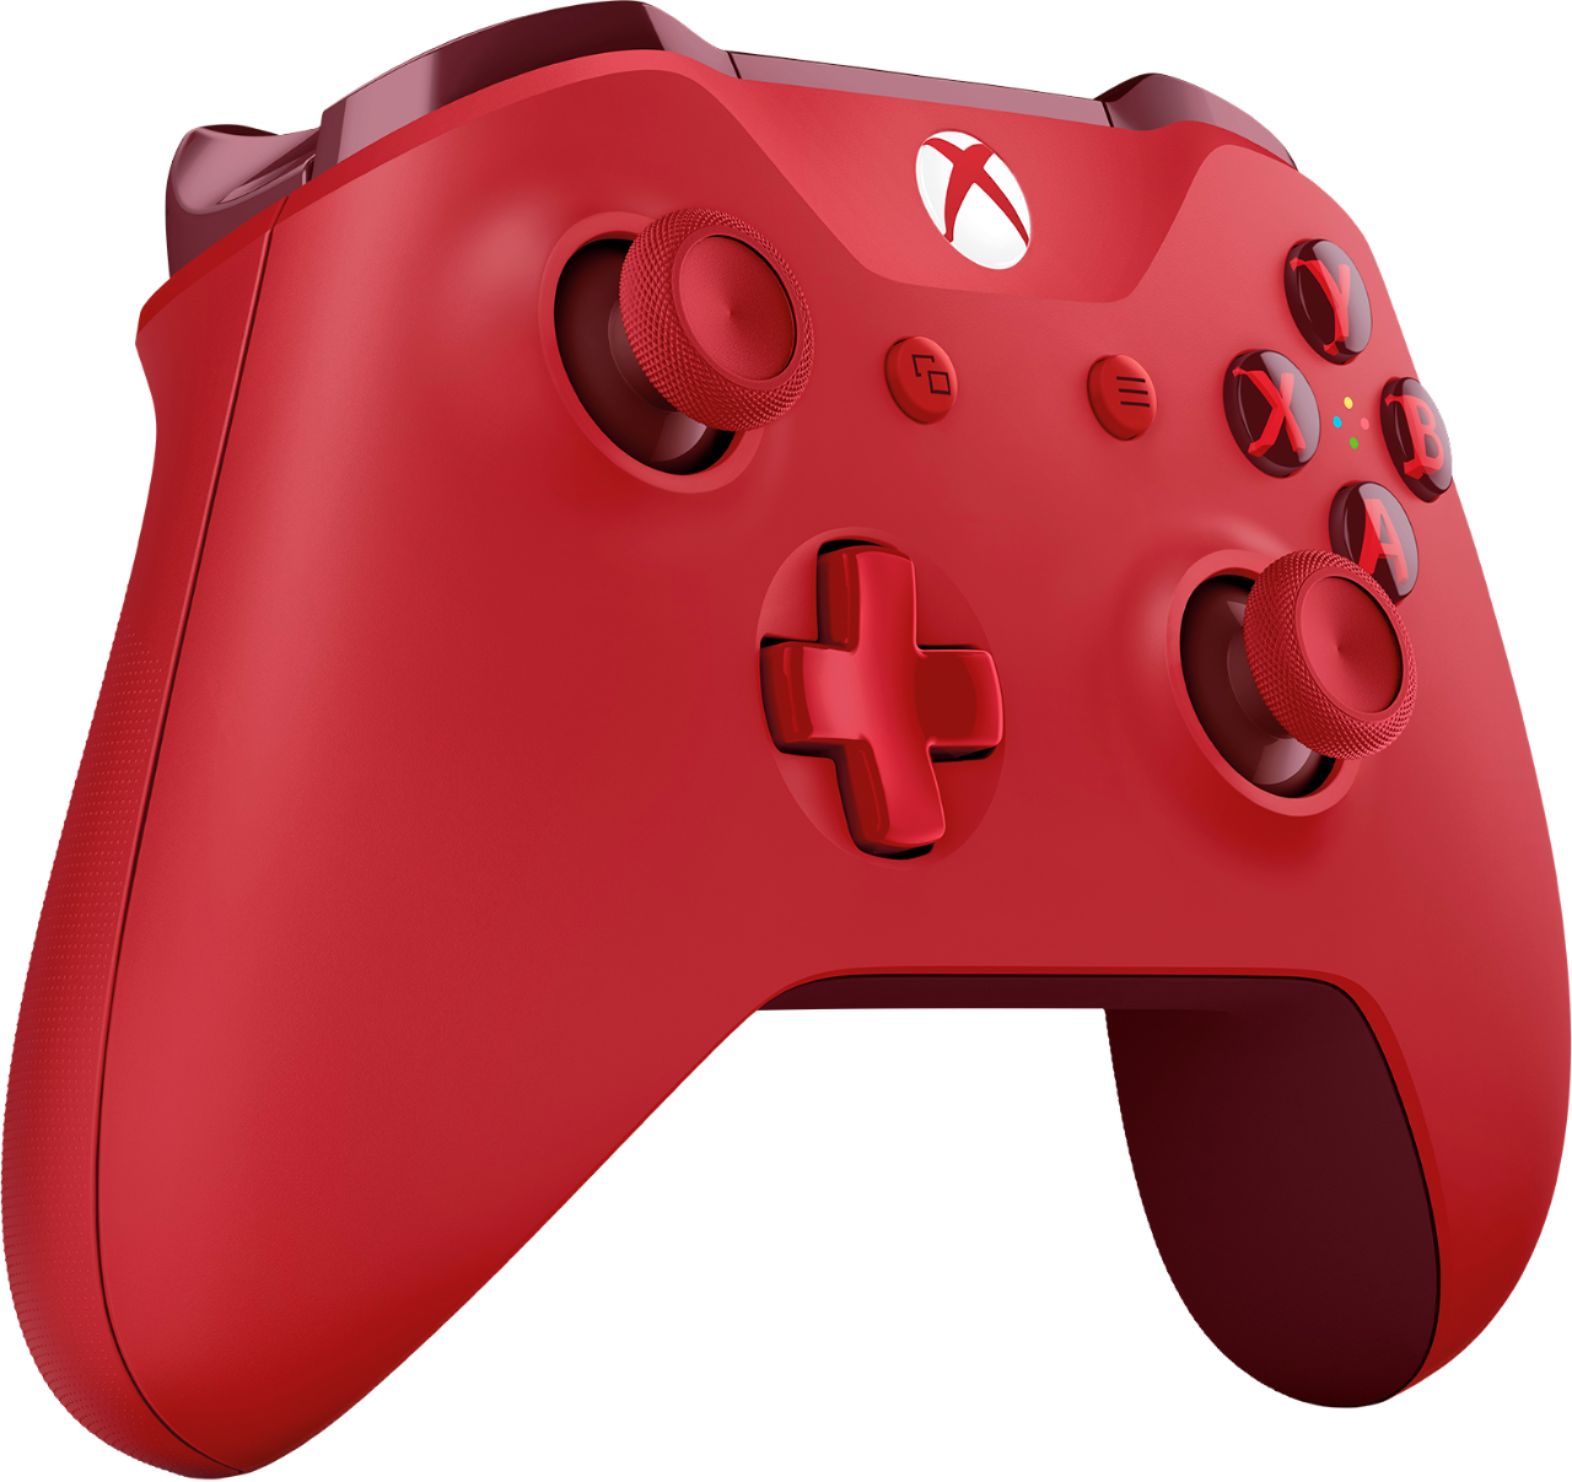 Angle View: Microsoft - Geek Squad Certified Refurbished Wireless Controller for Xbox One and Windows 10 - Red